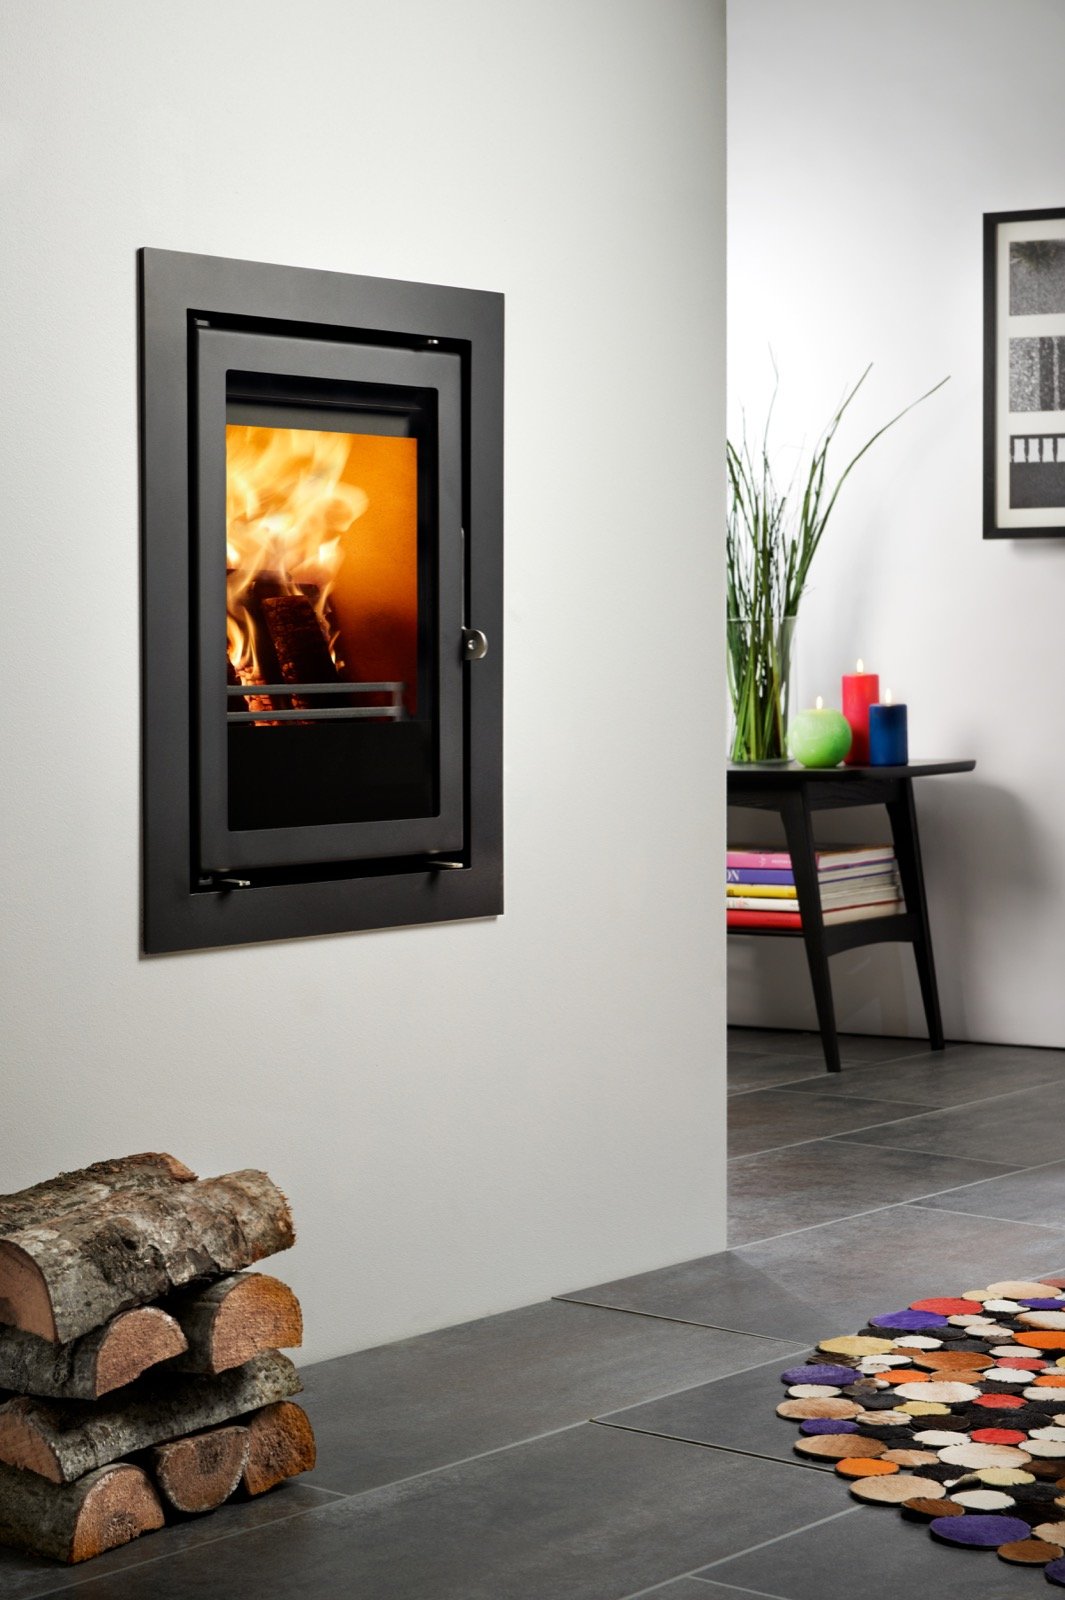 Westfire Uniq 35 Inset Multi Fuel Stove with 4 Sided Frame